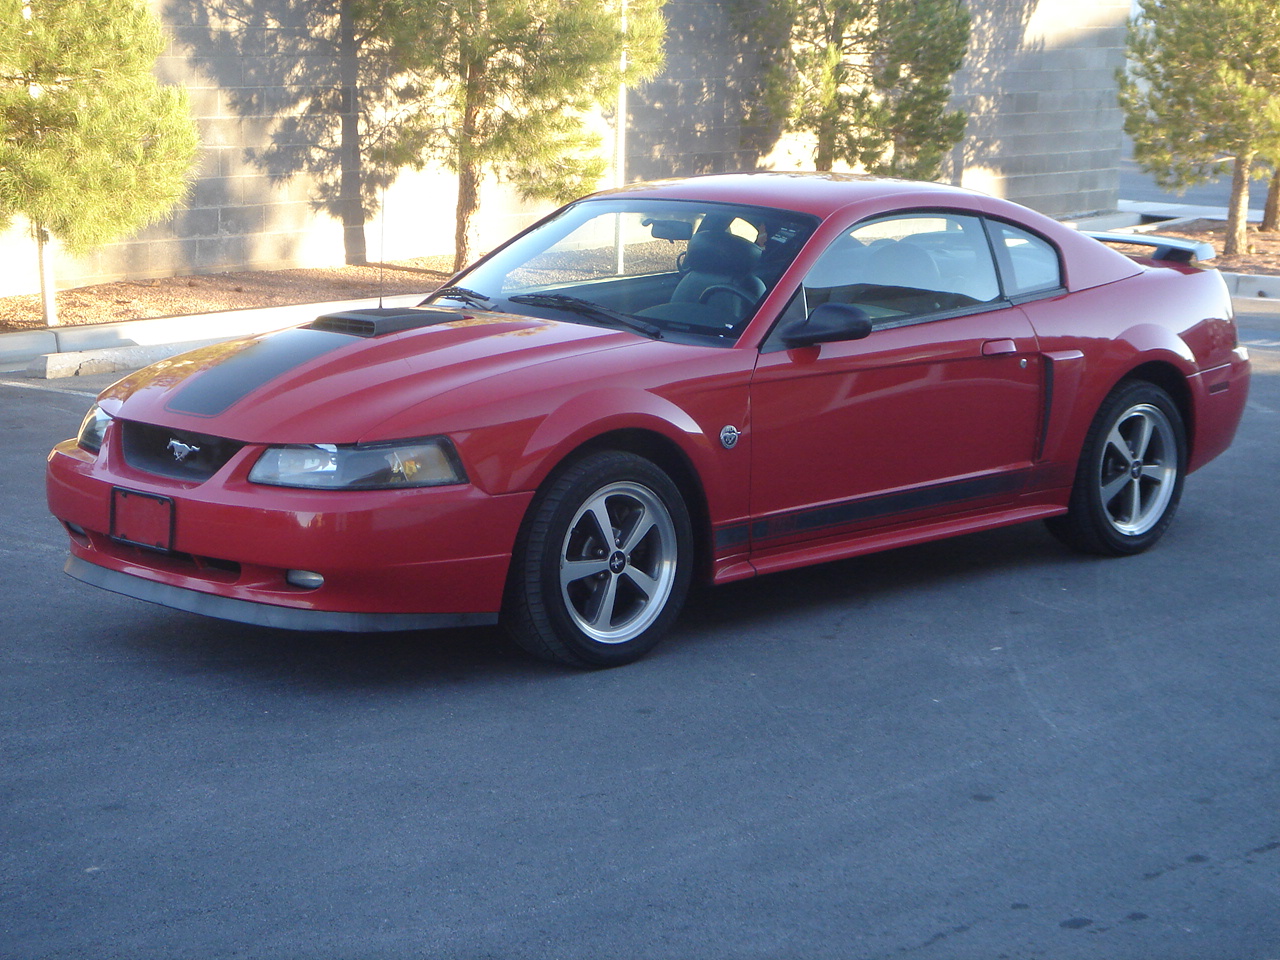 2004 Ford mach 1 mustang specs #1